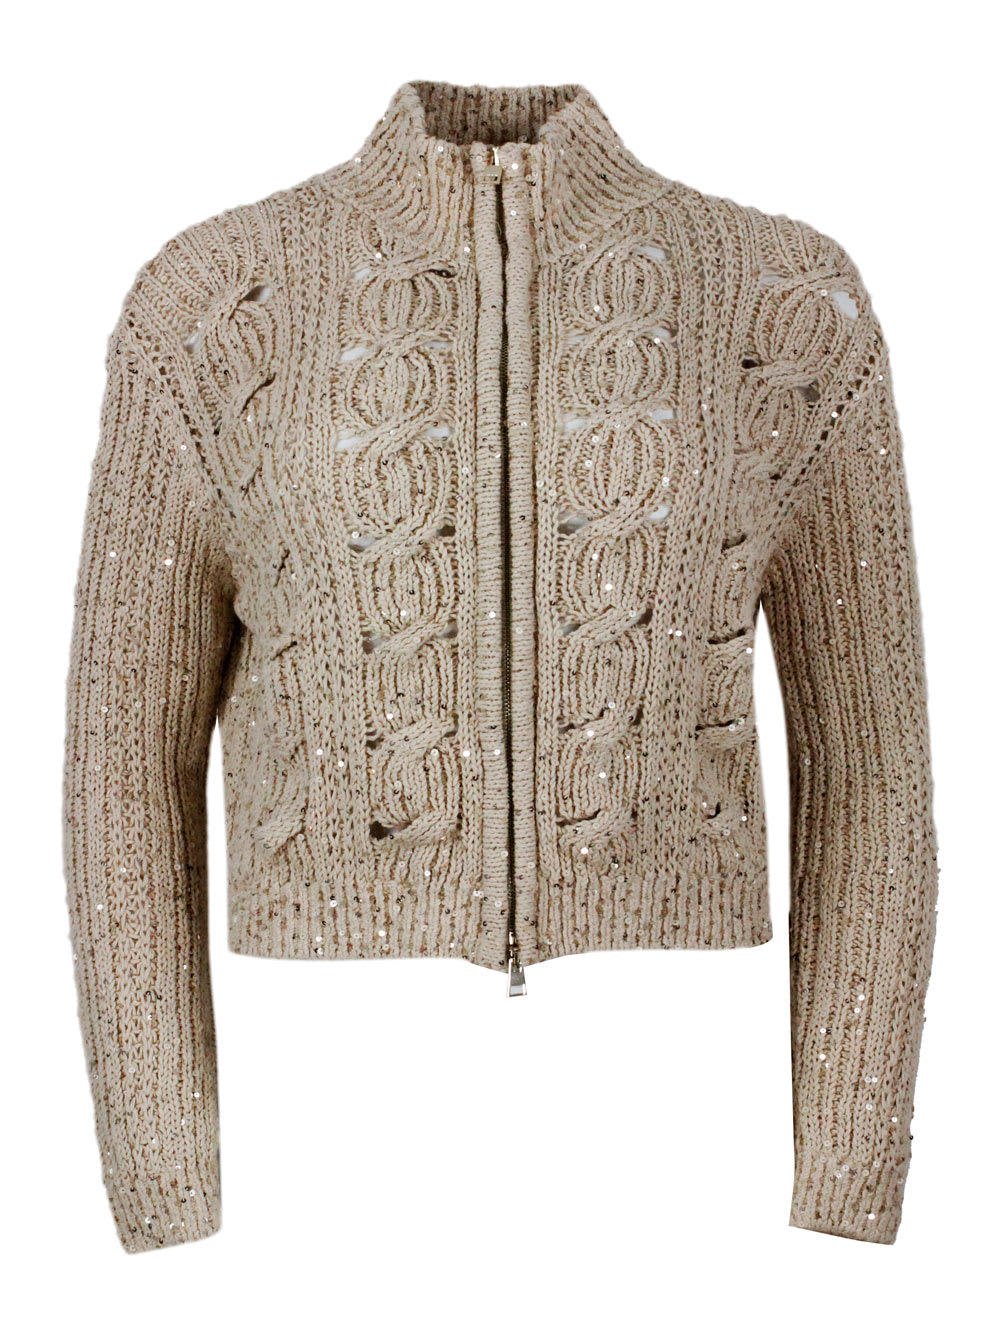 Lorena Antoniazzi Long-sleeved Full-zip Cardigan Sweater In Cotton Thread With Braided Work Embellished With Applied M In Gold